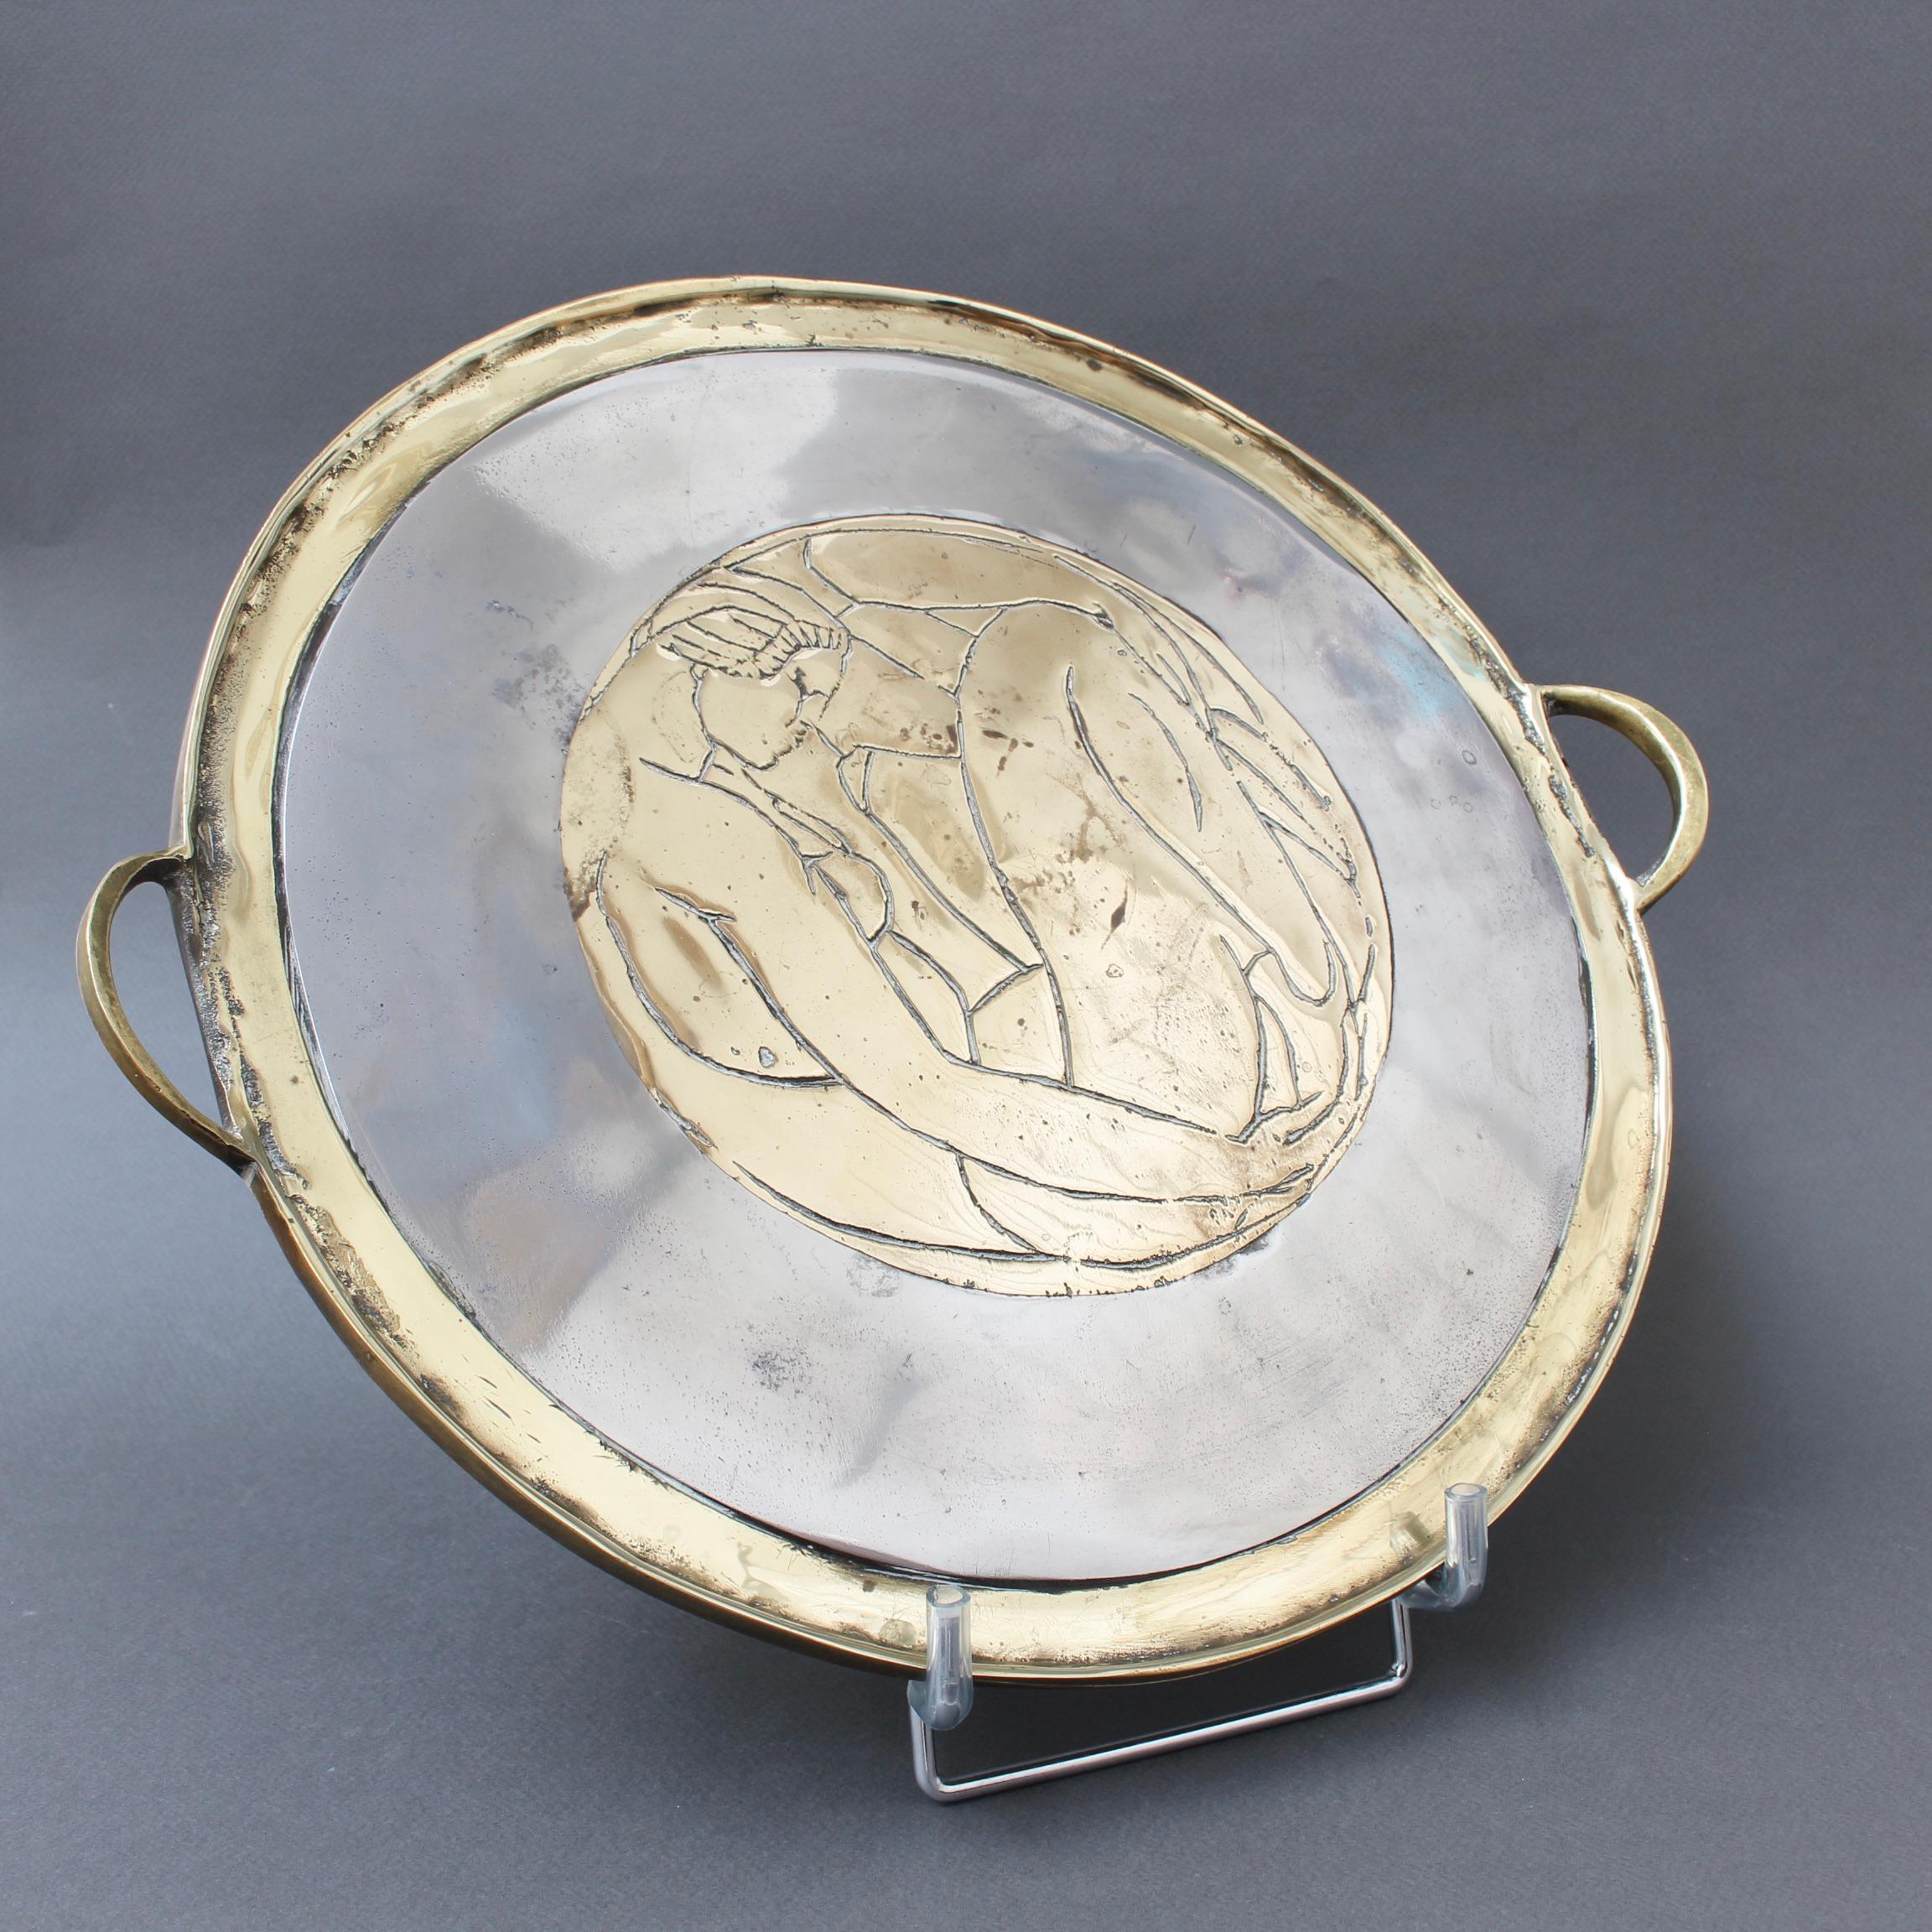 Aluminium and brass brutalist style serving tray by Leopold, s.c., (circa 1970s). In the style of David Marshall, this superb piece presents an art deco style image of a female nude incised in the centre brass circle. The tray is rugged, battered